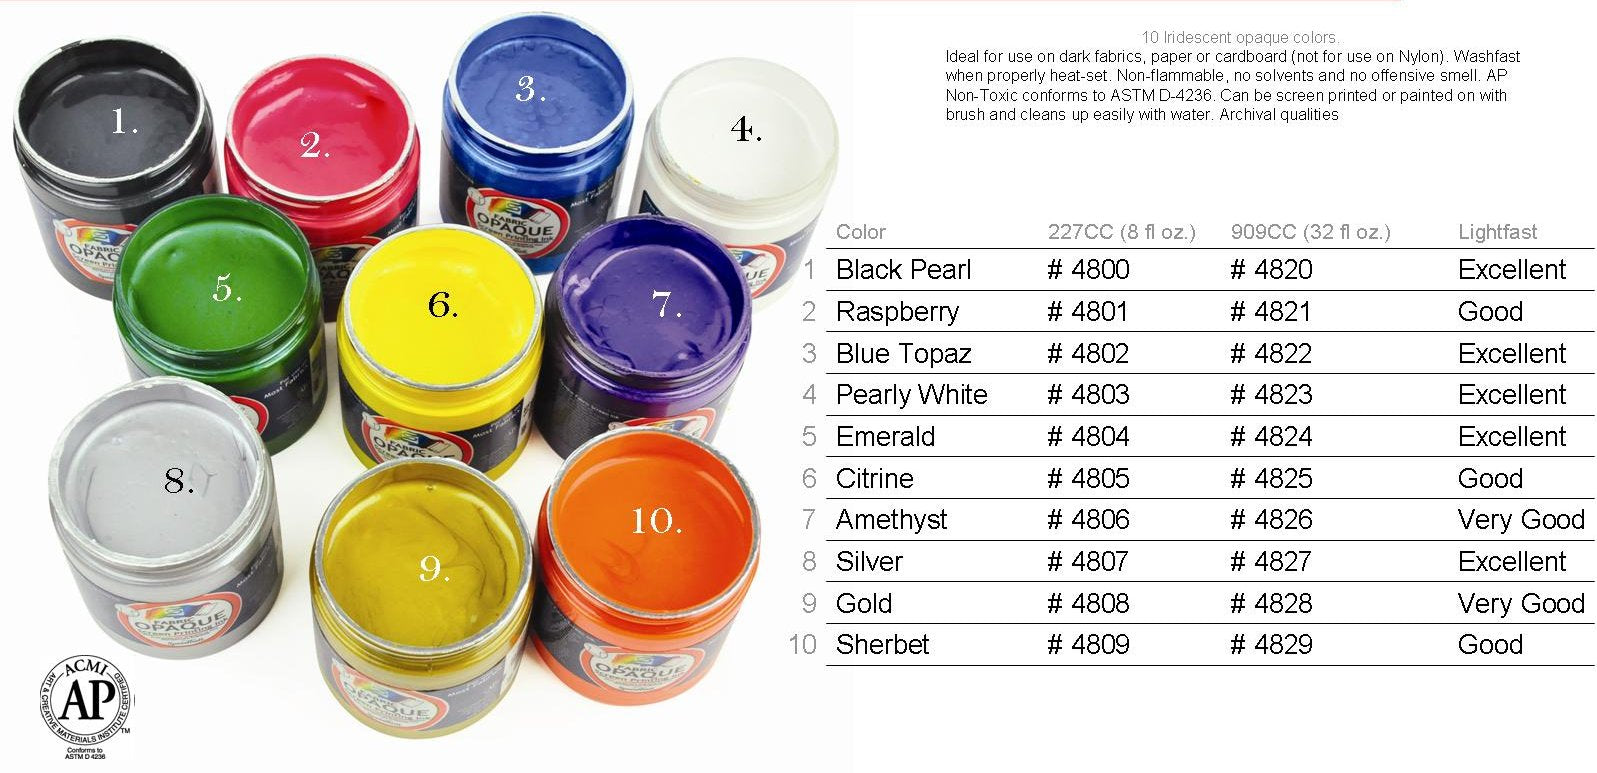 Speedball Opaque Screen Printing Inks Color Chart